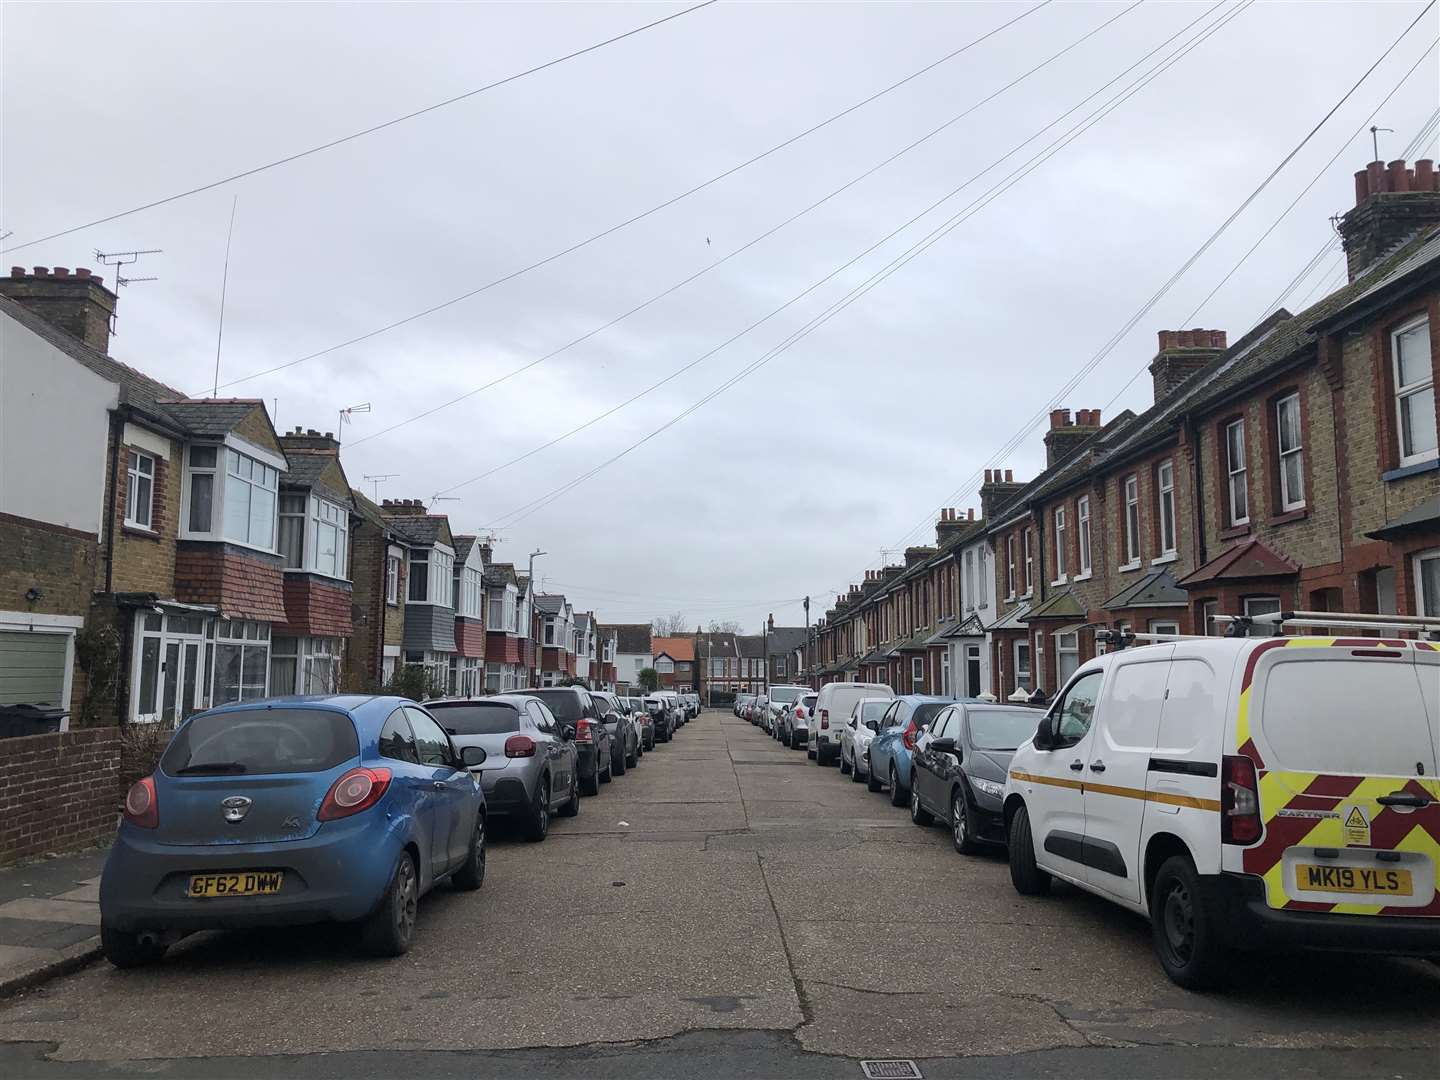 Locals say Rosebery Avenue is regularly lined with parked cars